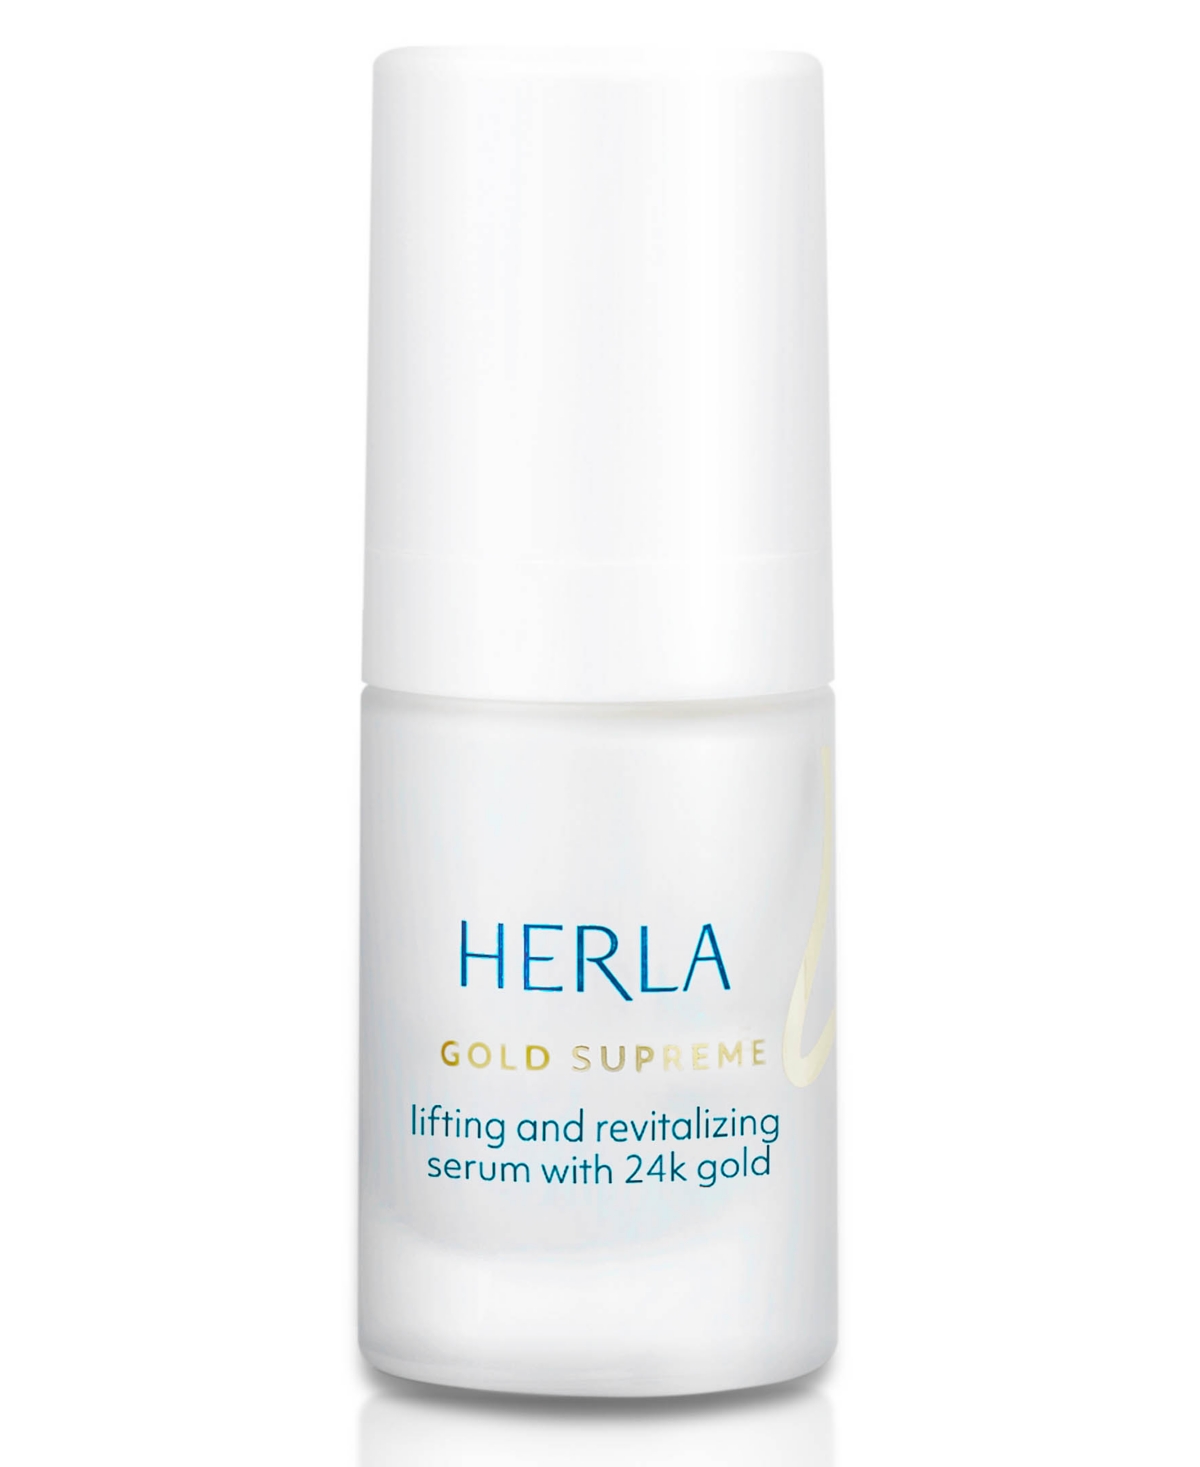 Herla Gold Supreme Lifting and Revitalizing Serum with 24K Gold